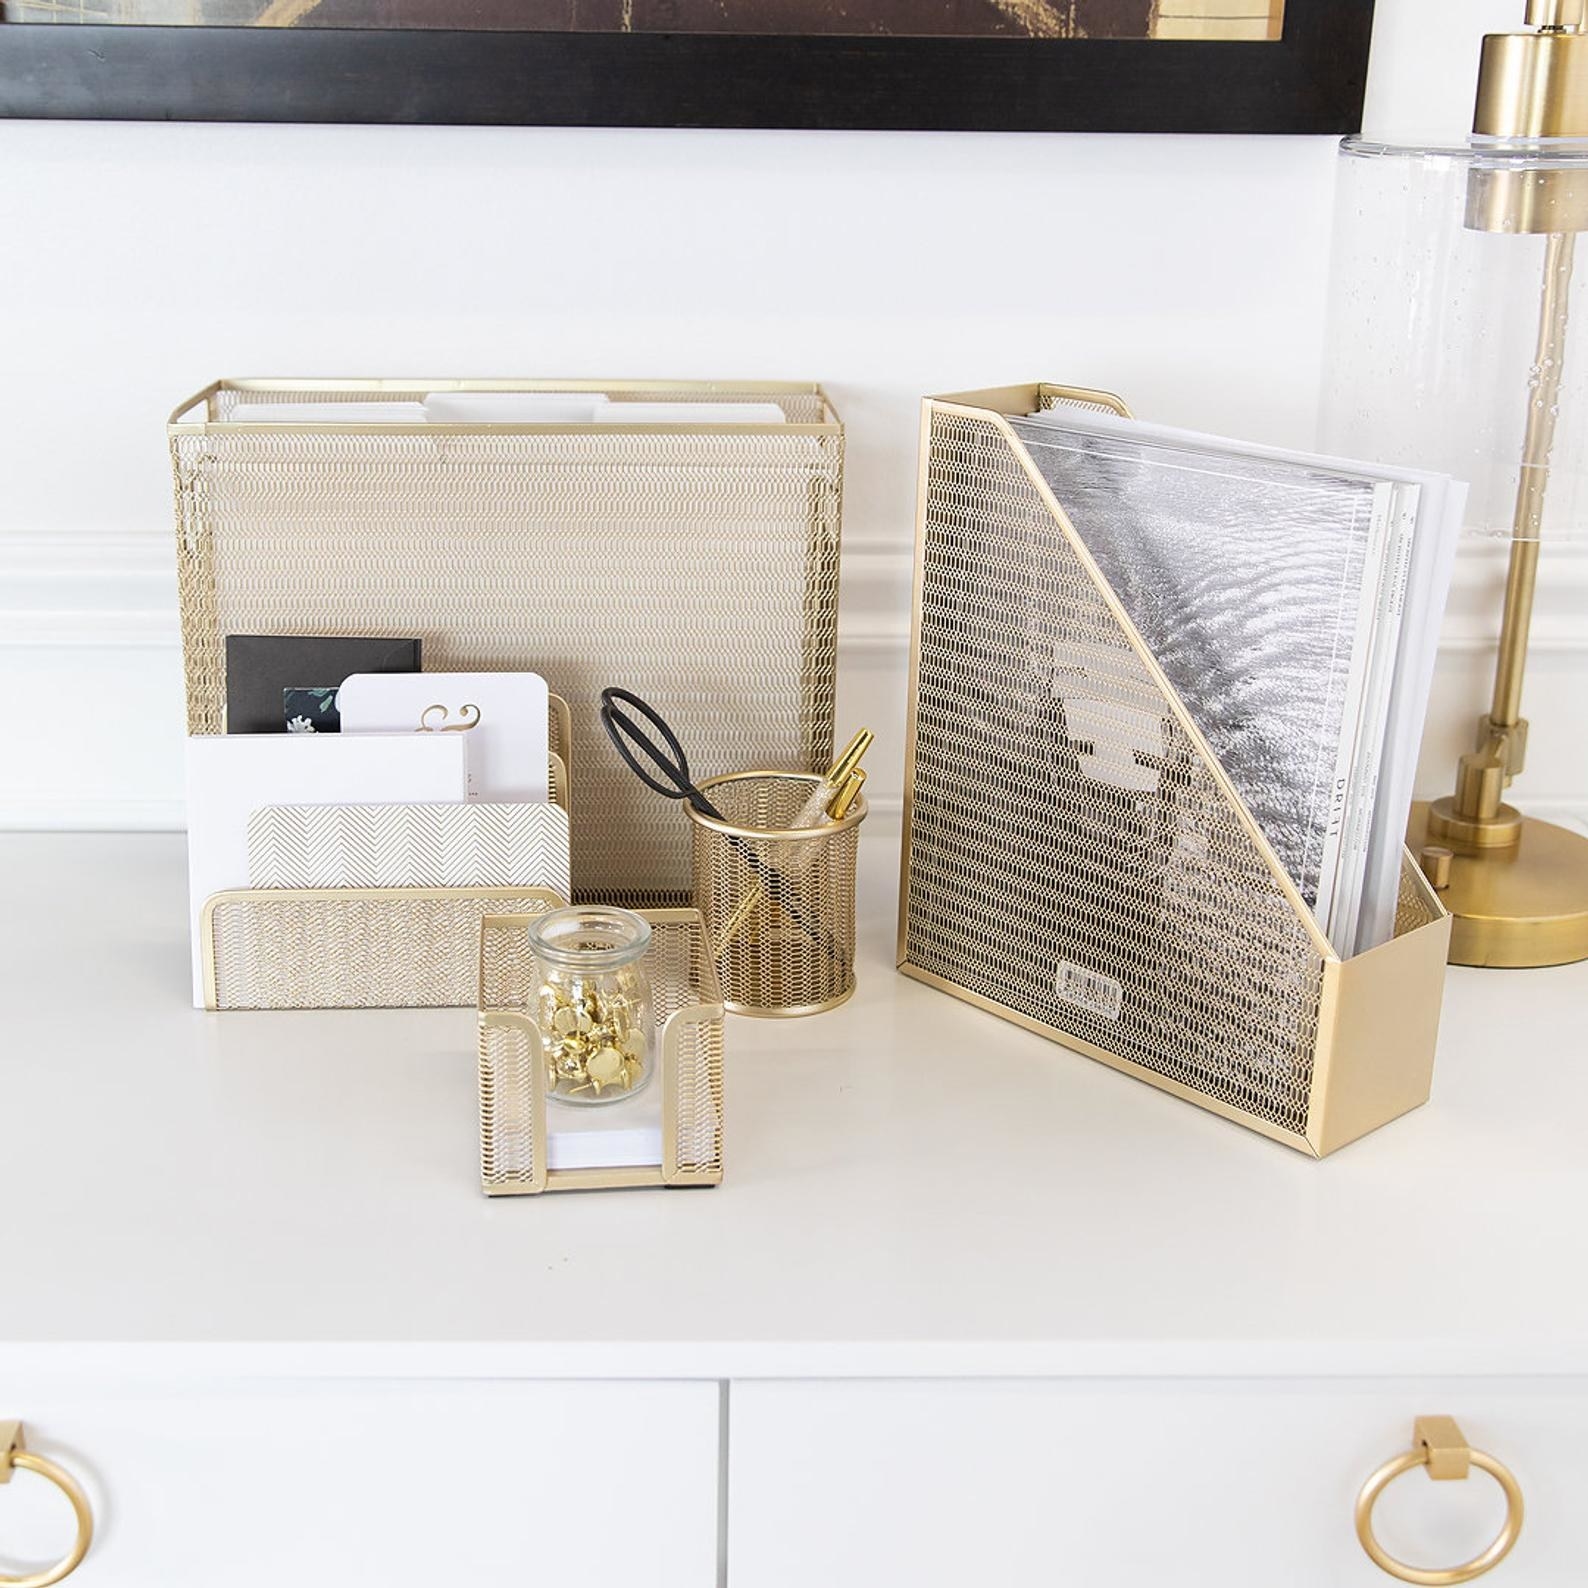 Five gold desk organizers filled with supplies and placed on desk